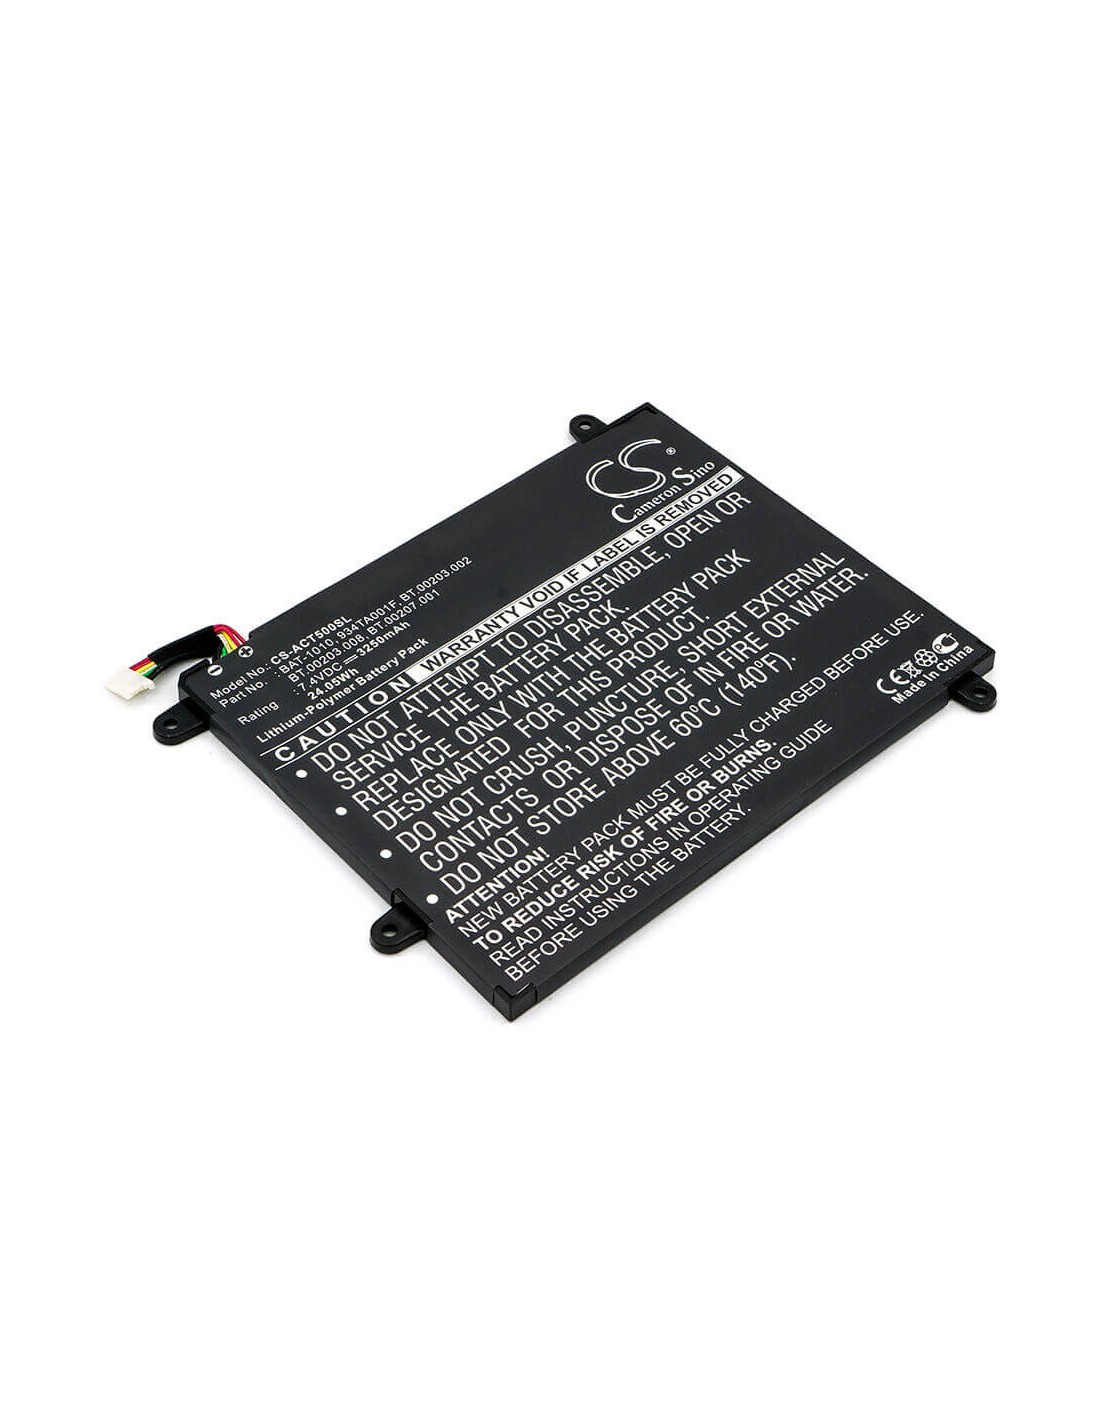 Battery for Acer Iconia A500, Iconia Tablet A500, Iconia A500-10s32 7.4V, 3250mAh - 24.05Wh